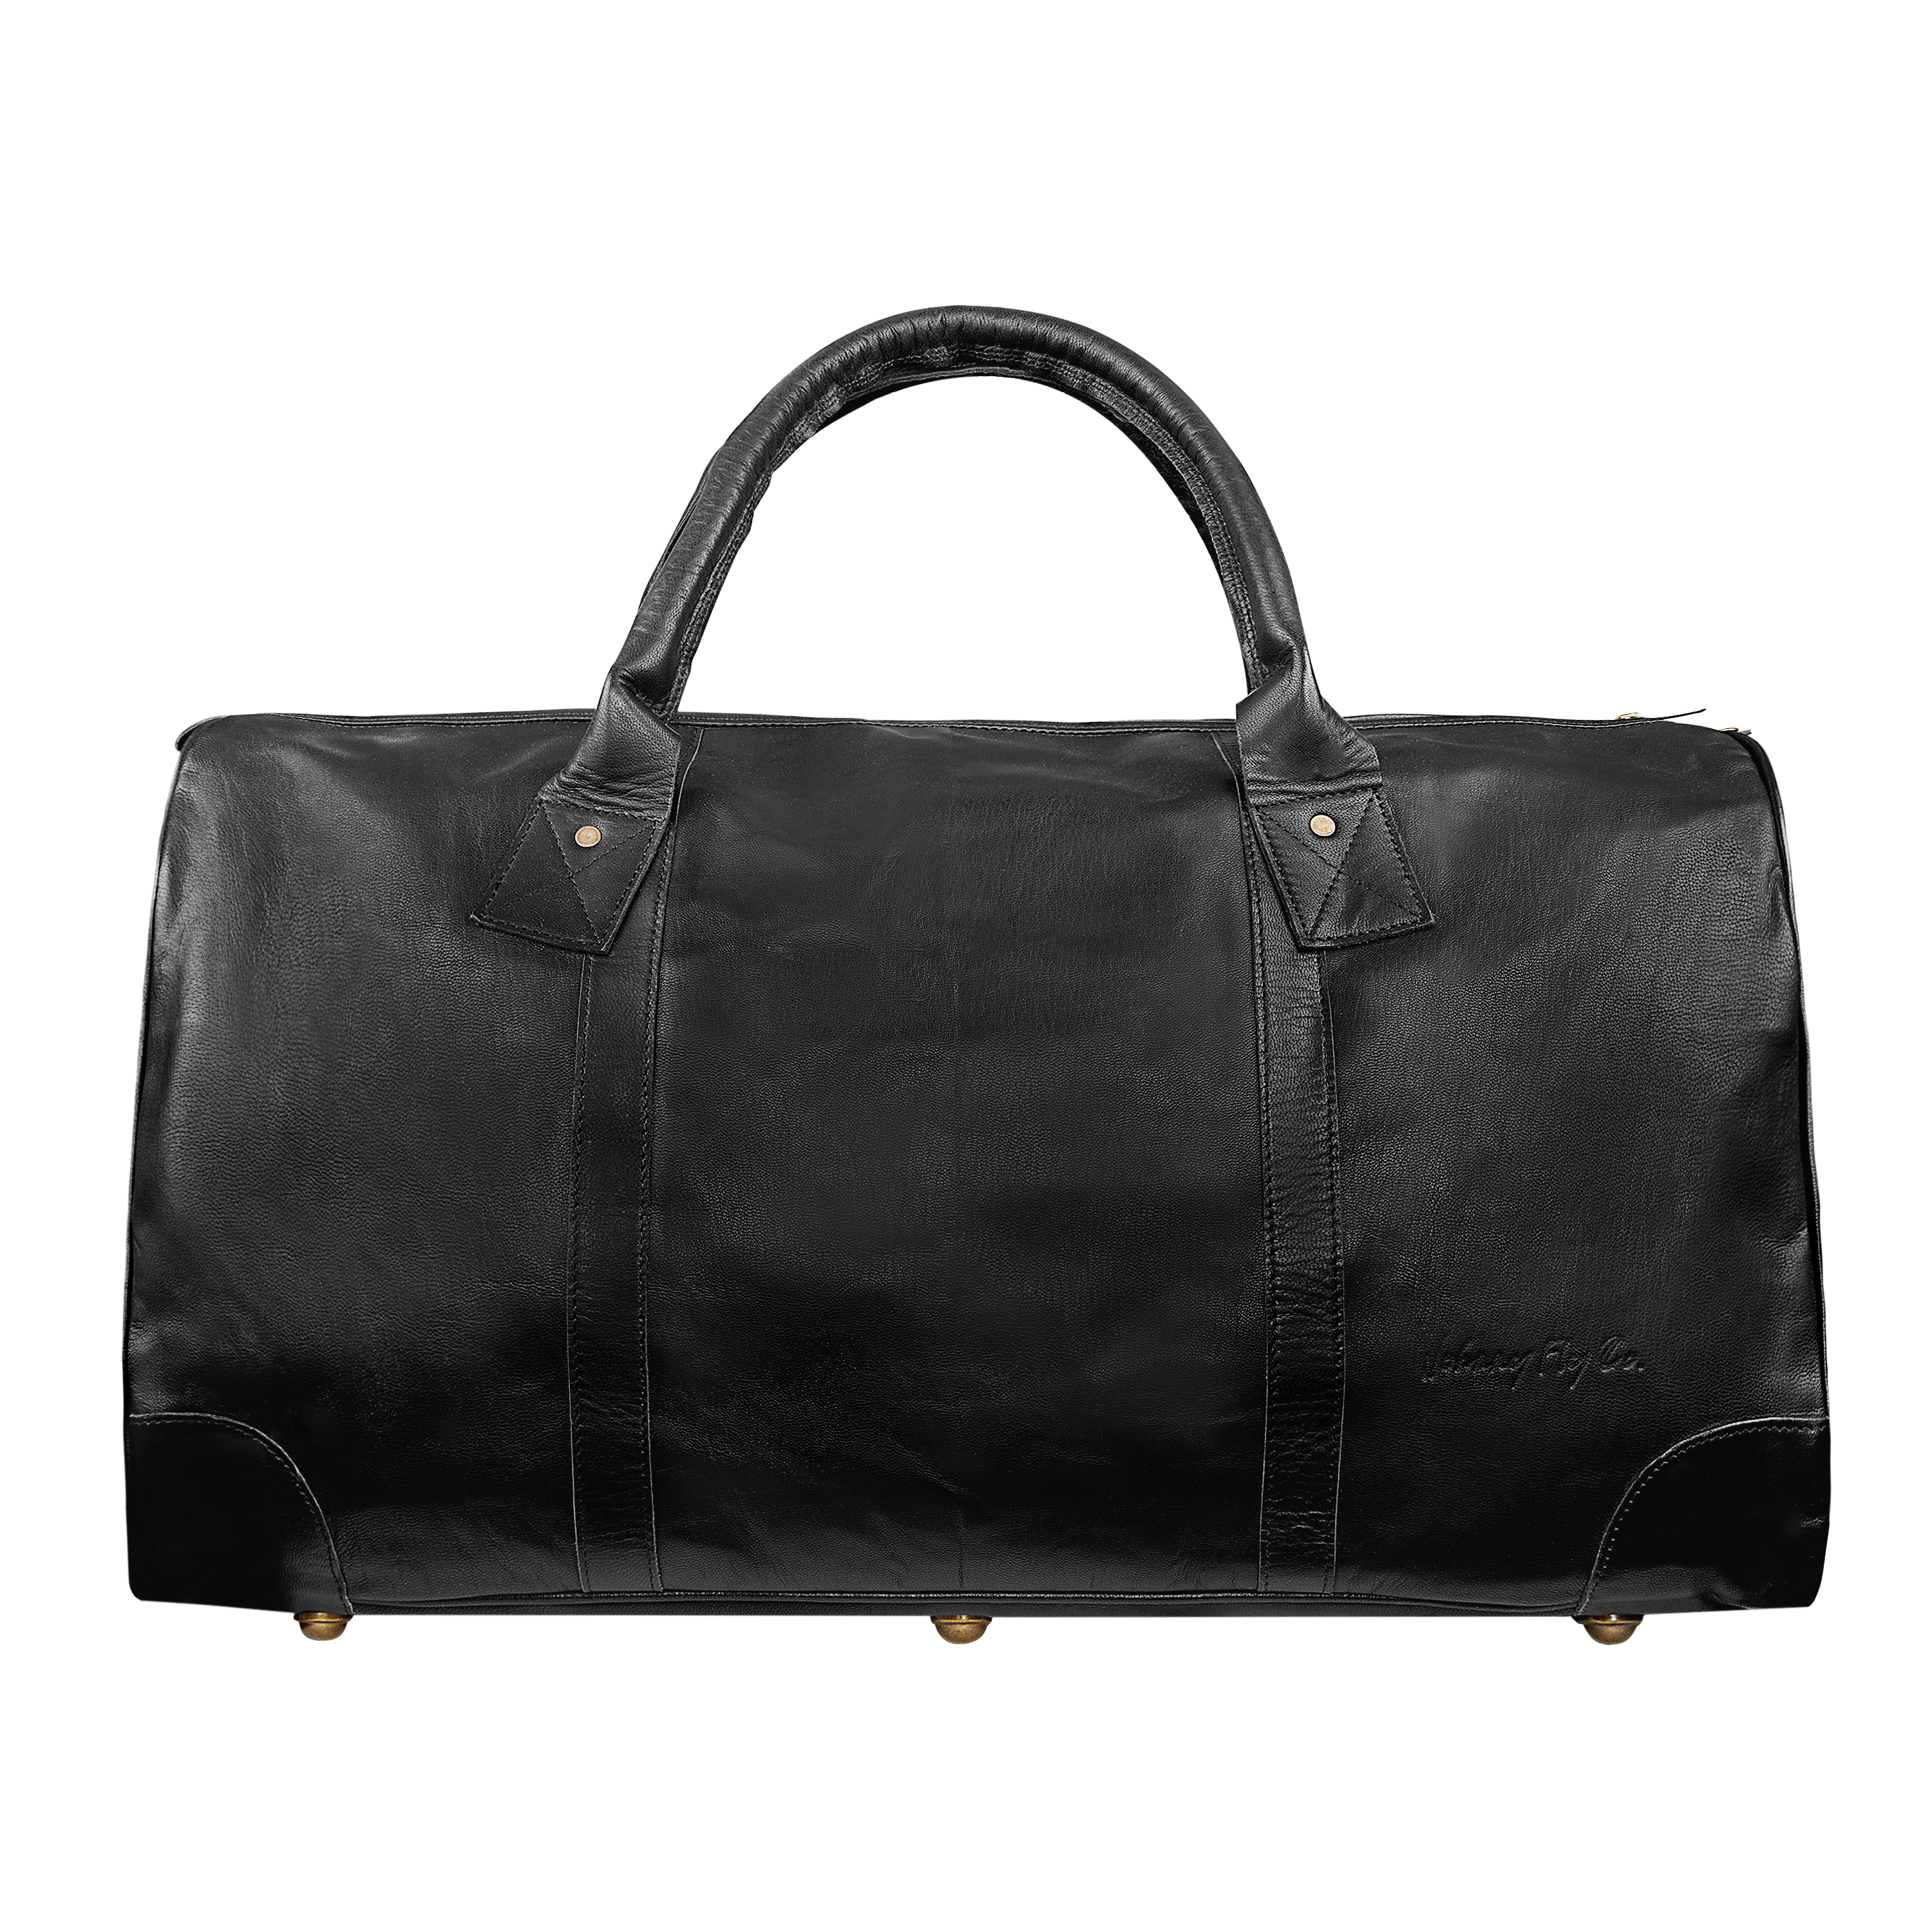 Anniversary Edition Leather Bags